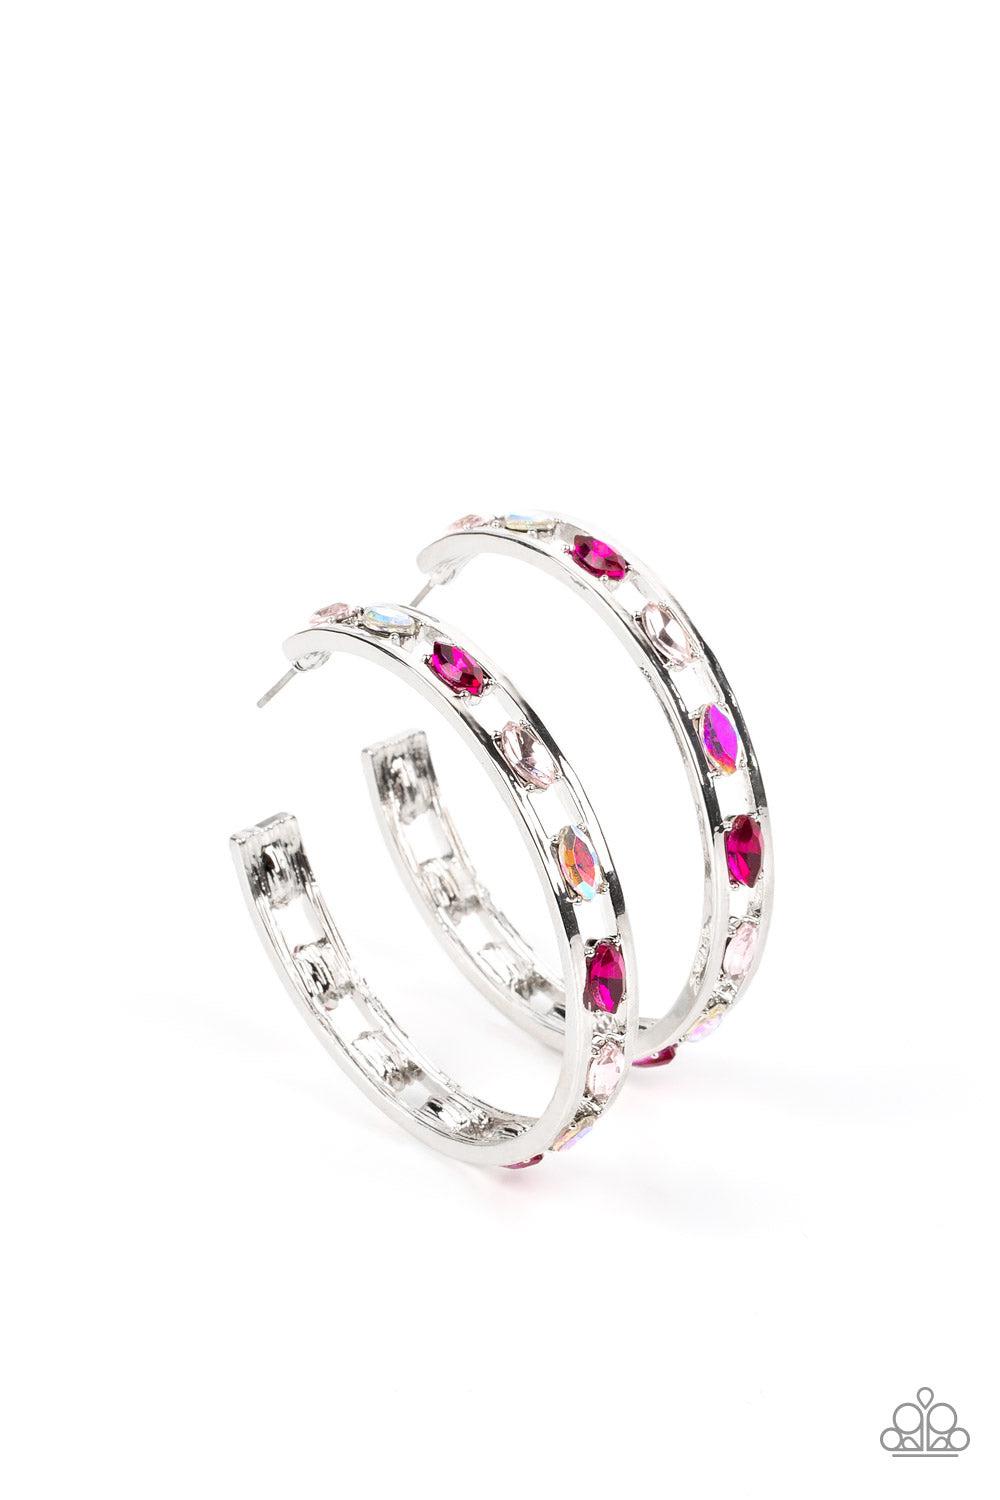 The Gem Fairy Pink Hoop Earrings - Paparazzi Accessories- lightbox - CarasShop.com - $5 Jewelry by Cara Jewels